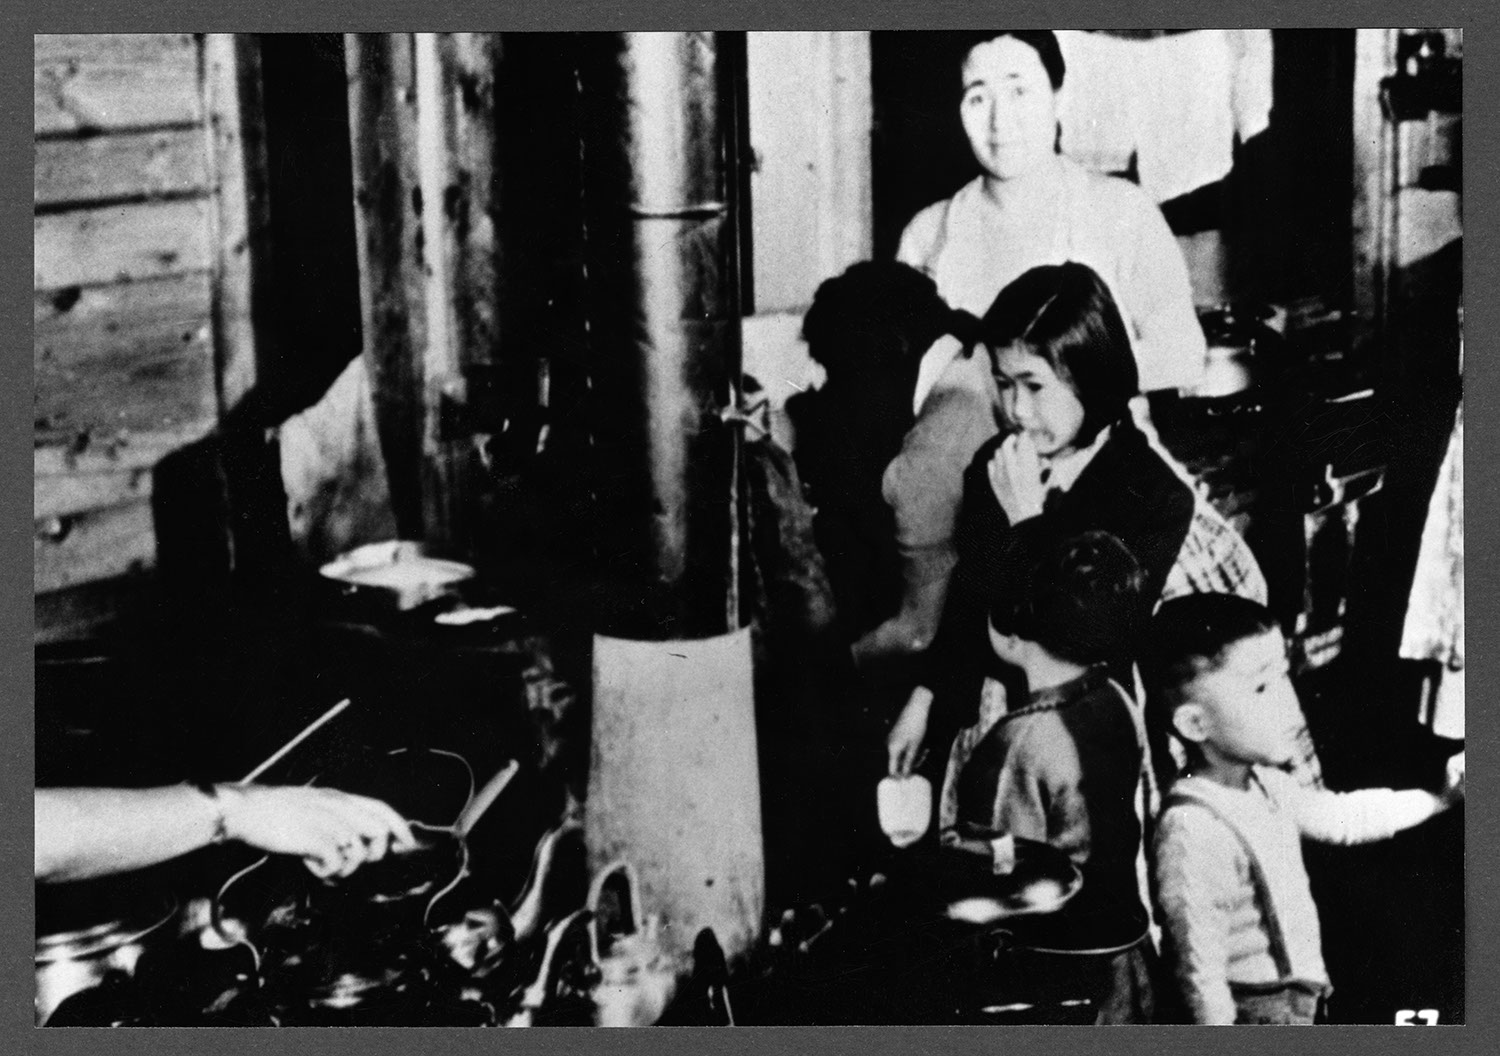 Japanese Canadians in an internment camp: Recto